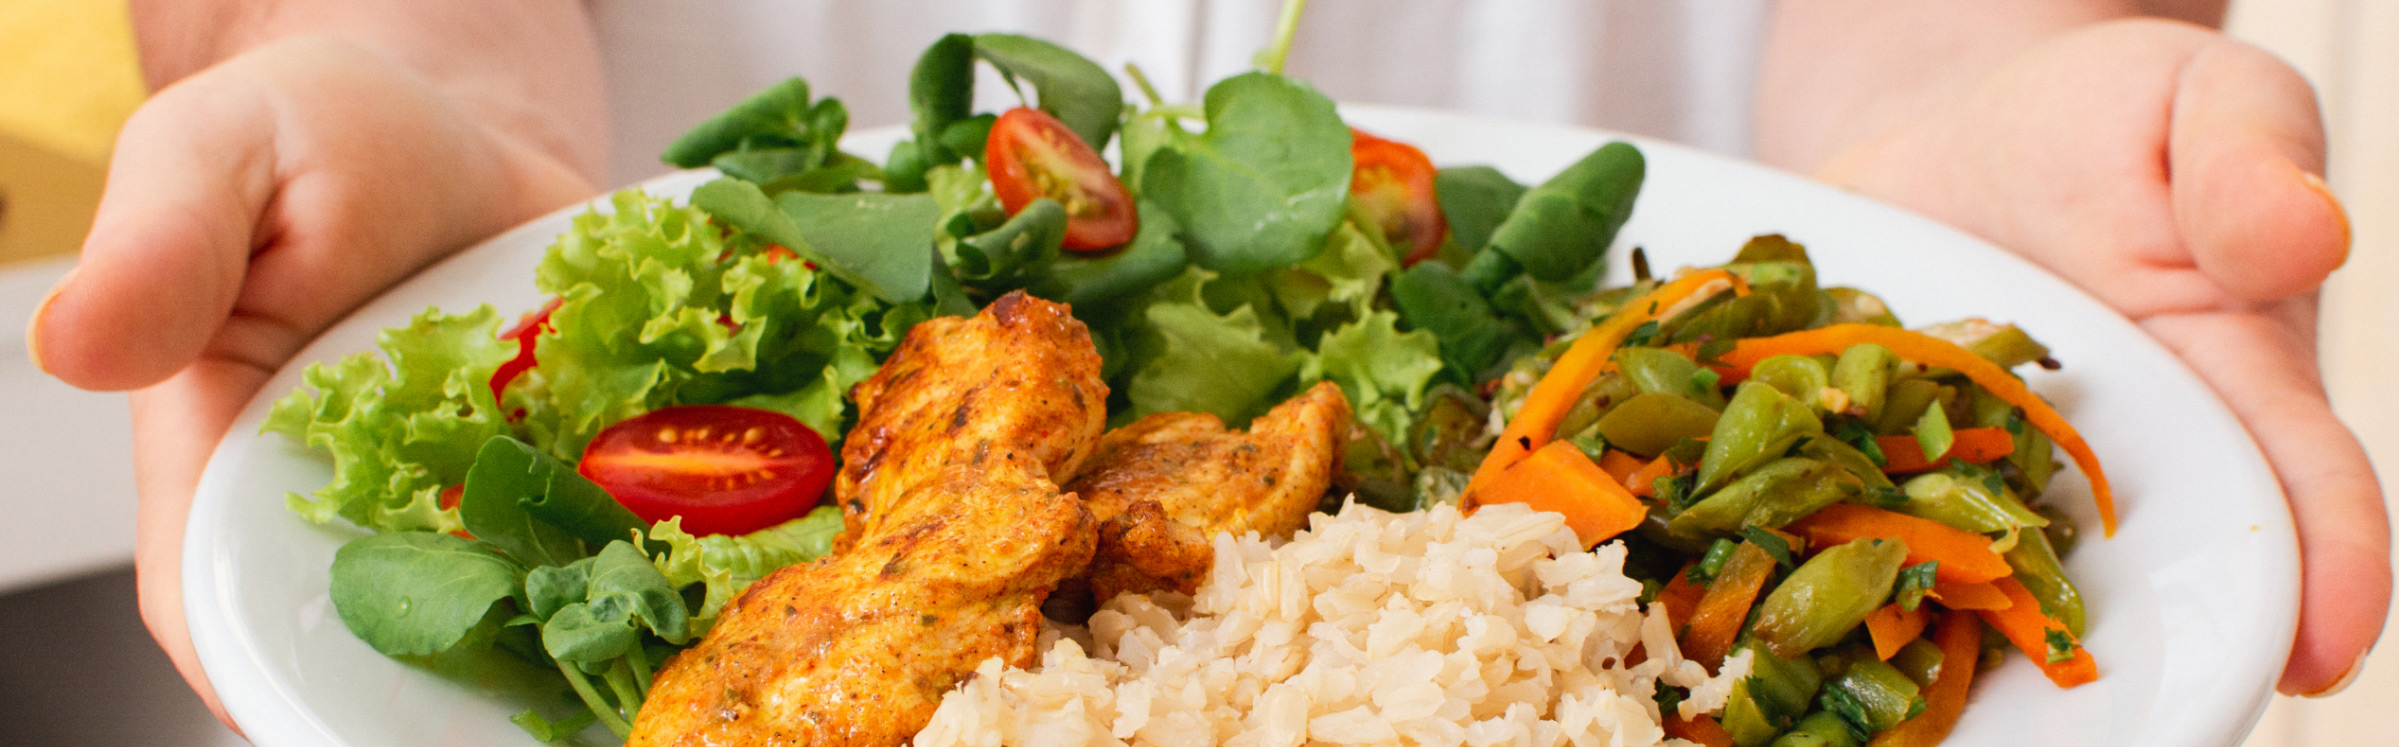 A person holding a plate with a meal consisting of seasoned chicken, brown rice, mixed salad greens, cherry tomatoes, and sautéed vegetables.